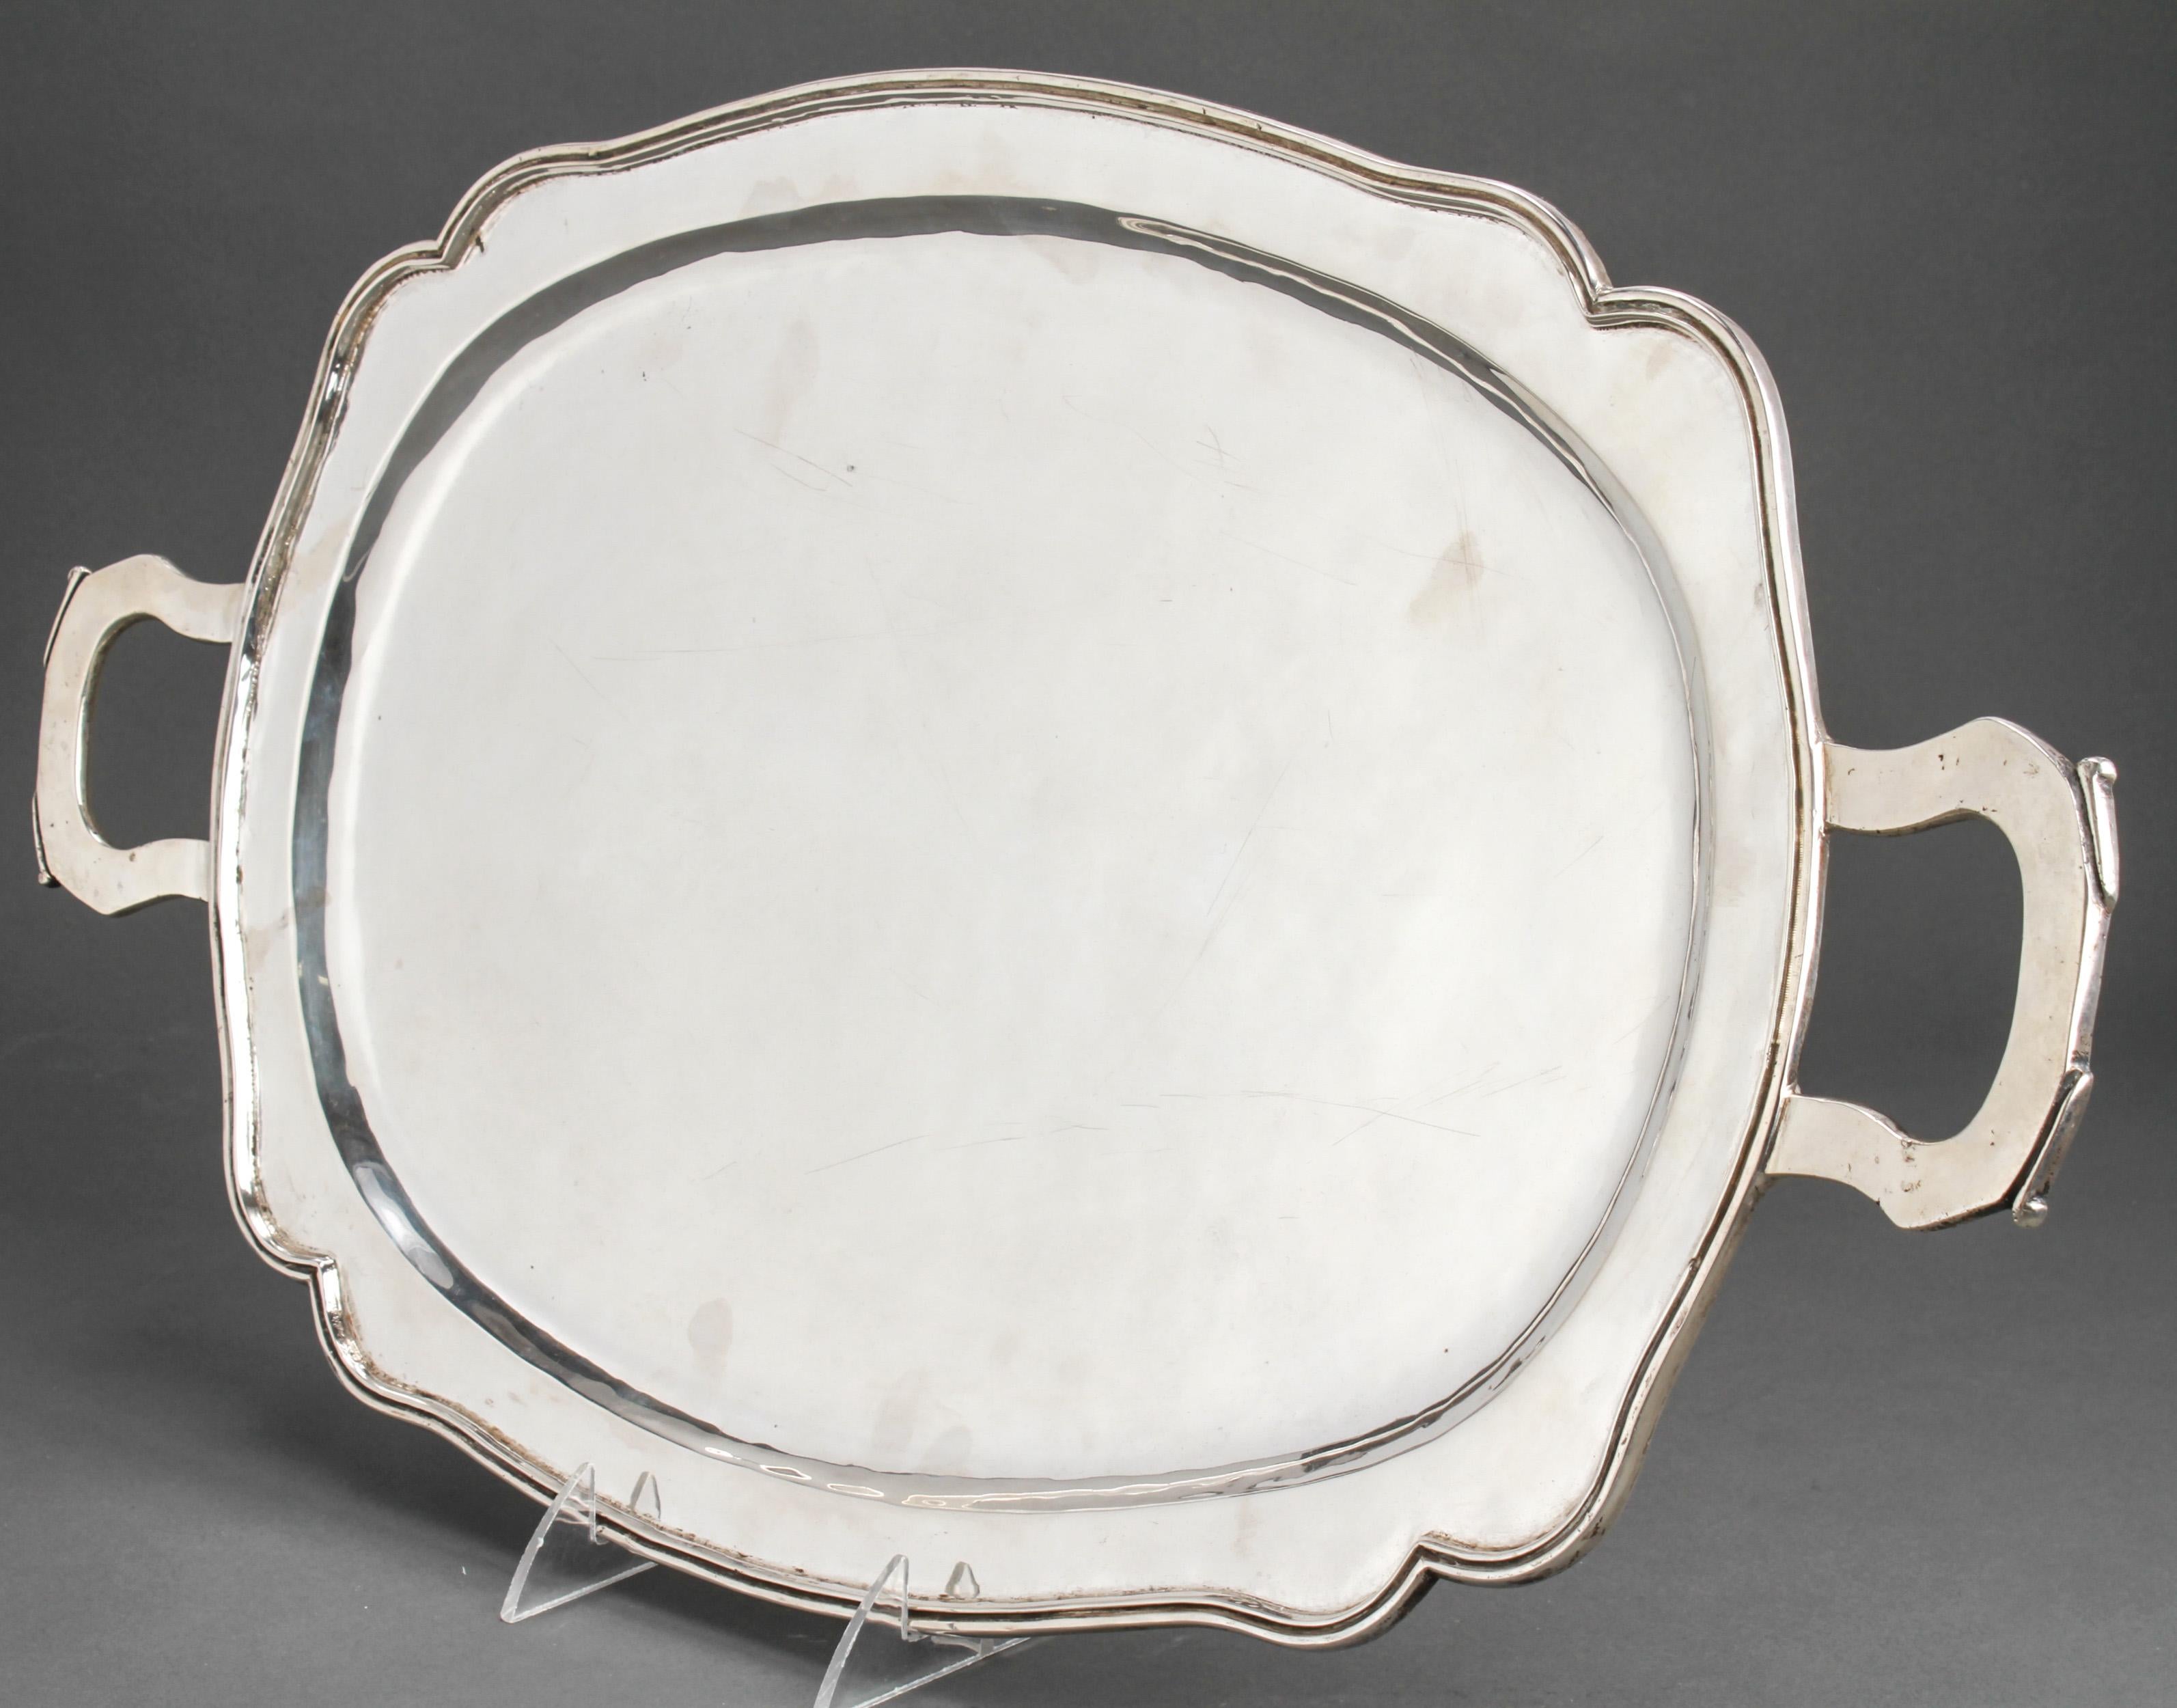 South American Peruvian silver oblong handled serving tray. The piece is marked under one handle: 